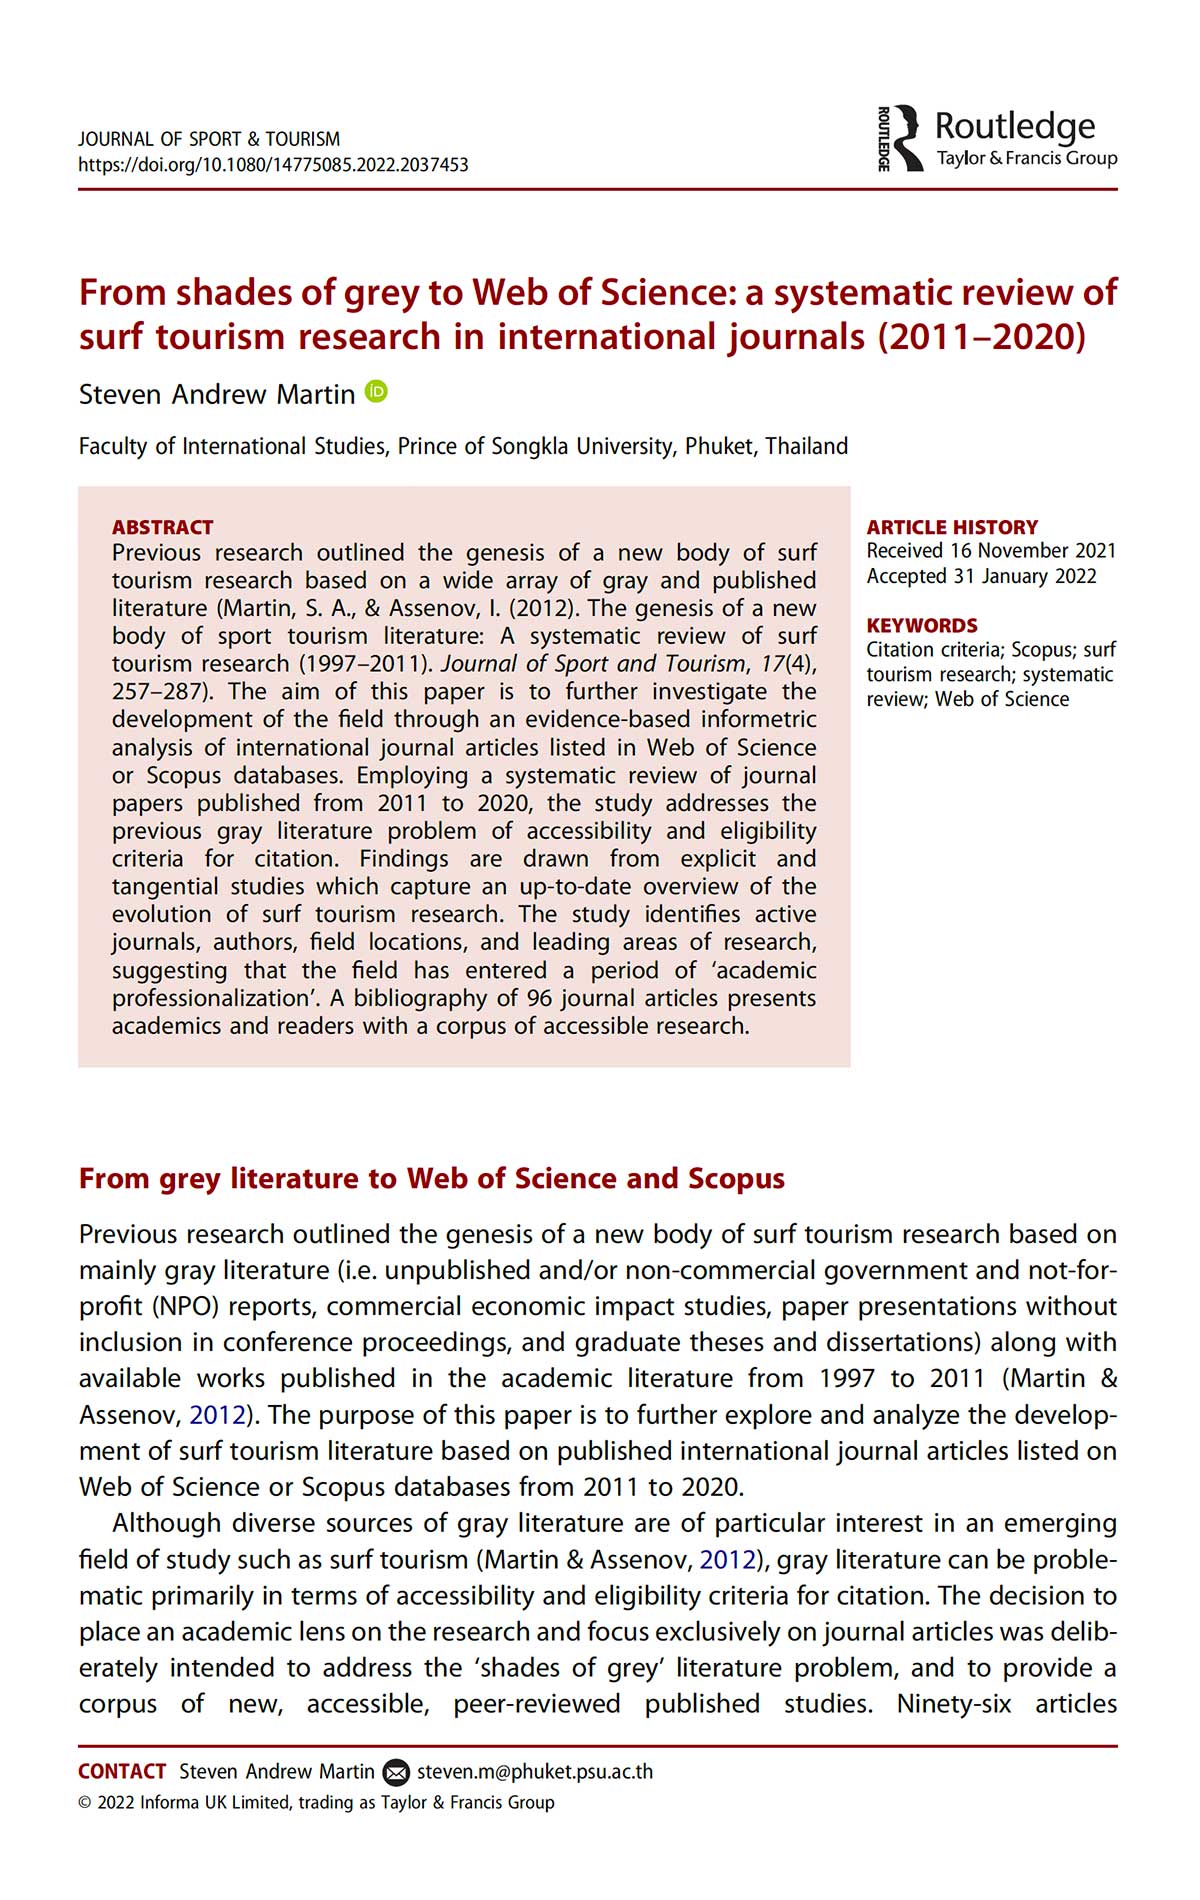 Dr Steven A Martin (2022) Journal of Sport & Tourism | from shades of grey to Web of Science A systematic review of surf tourism research in international journals